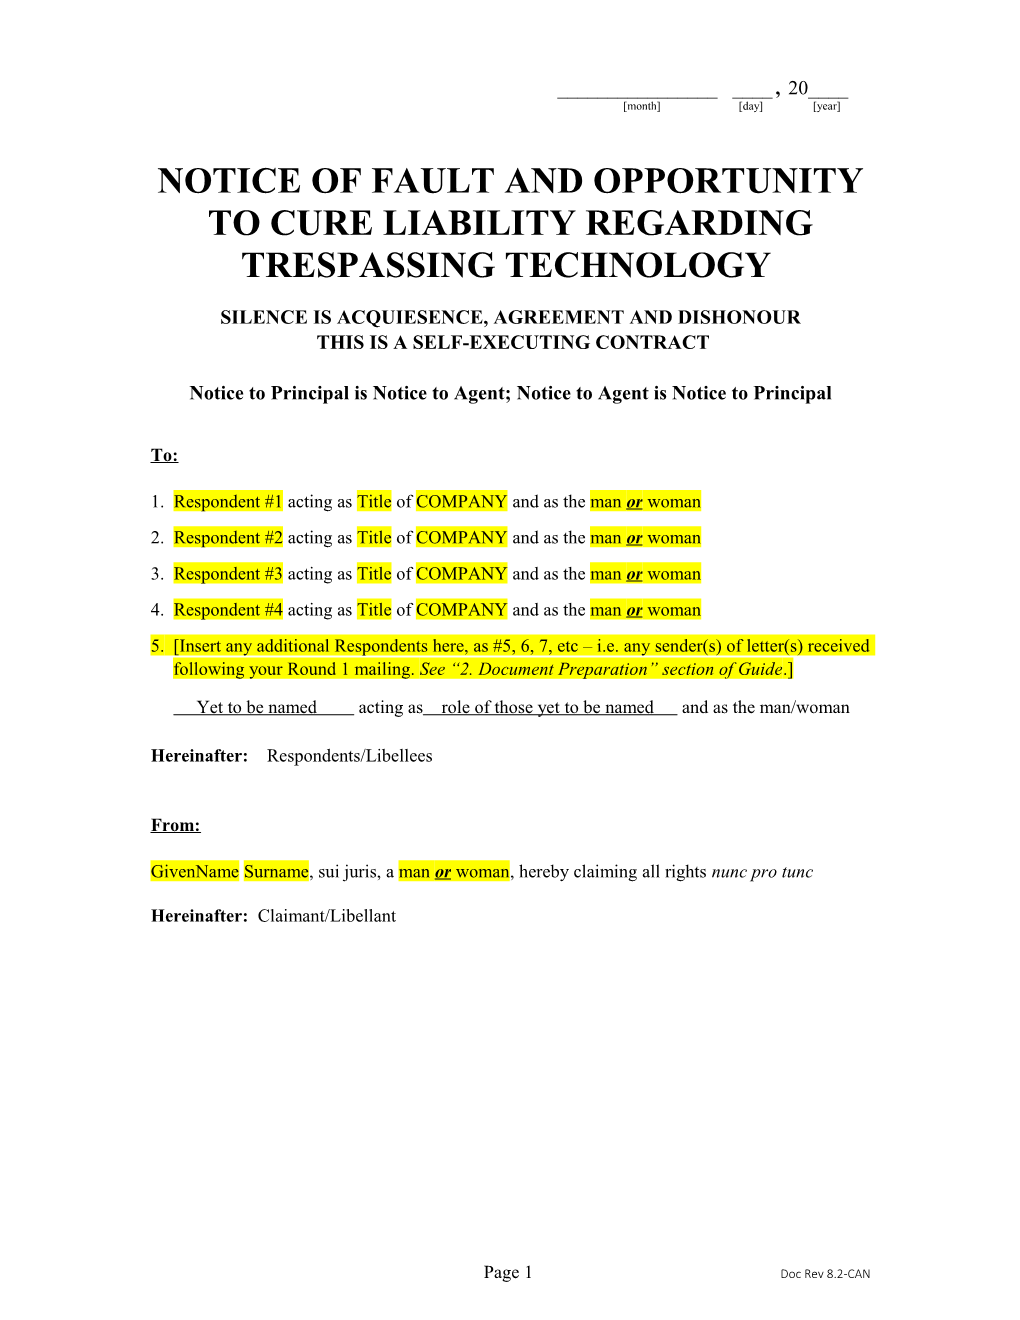 Notice of Fault and Opportunity to Cure Liability Regarding Trespassing Technology